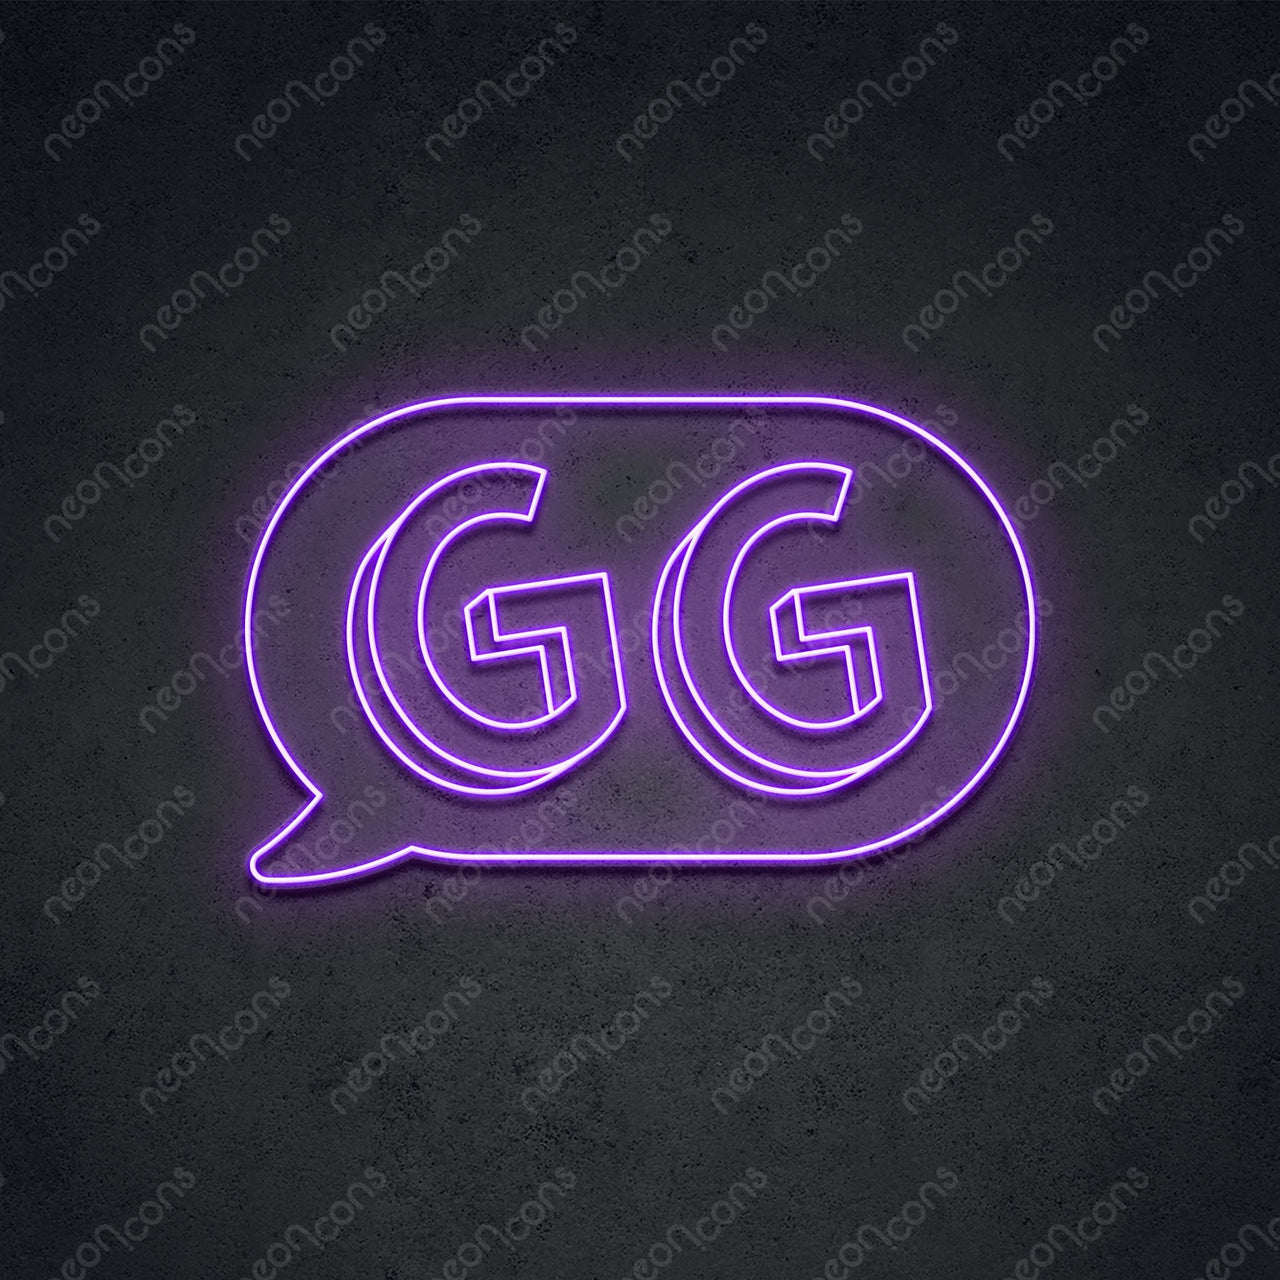 'GG In The Chat' Neon Sign 45cm (1.5ft) / Purple / LED by Neon Icons